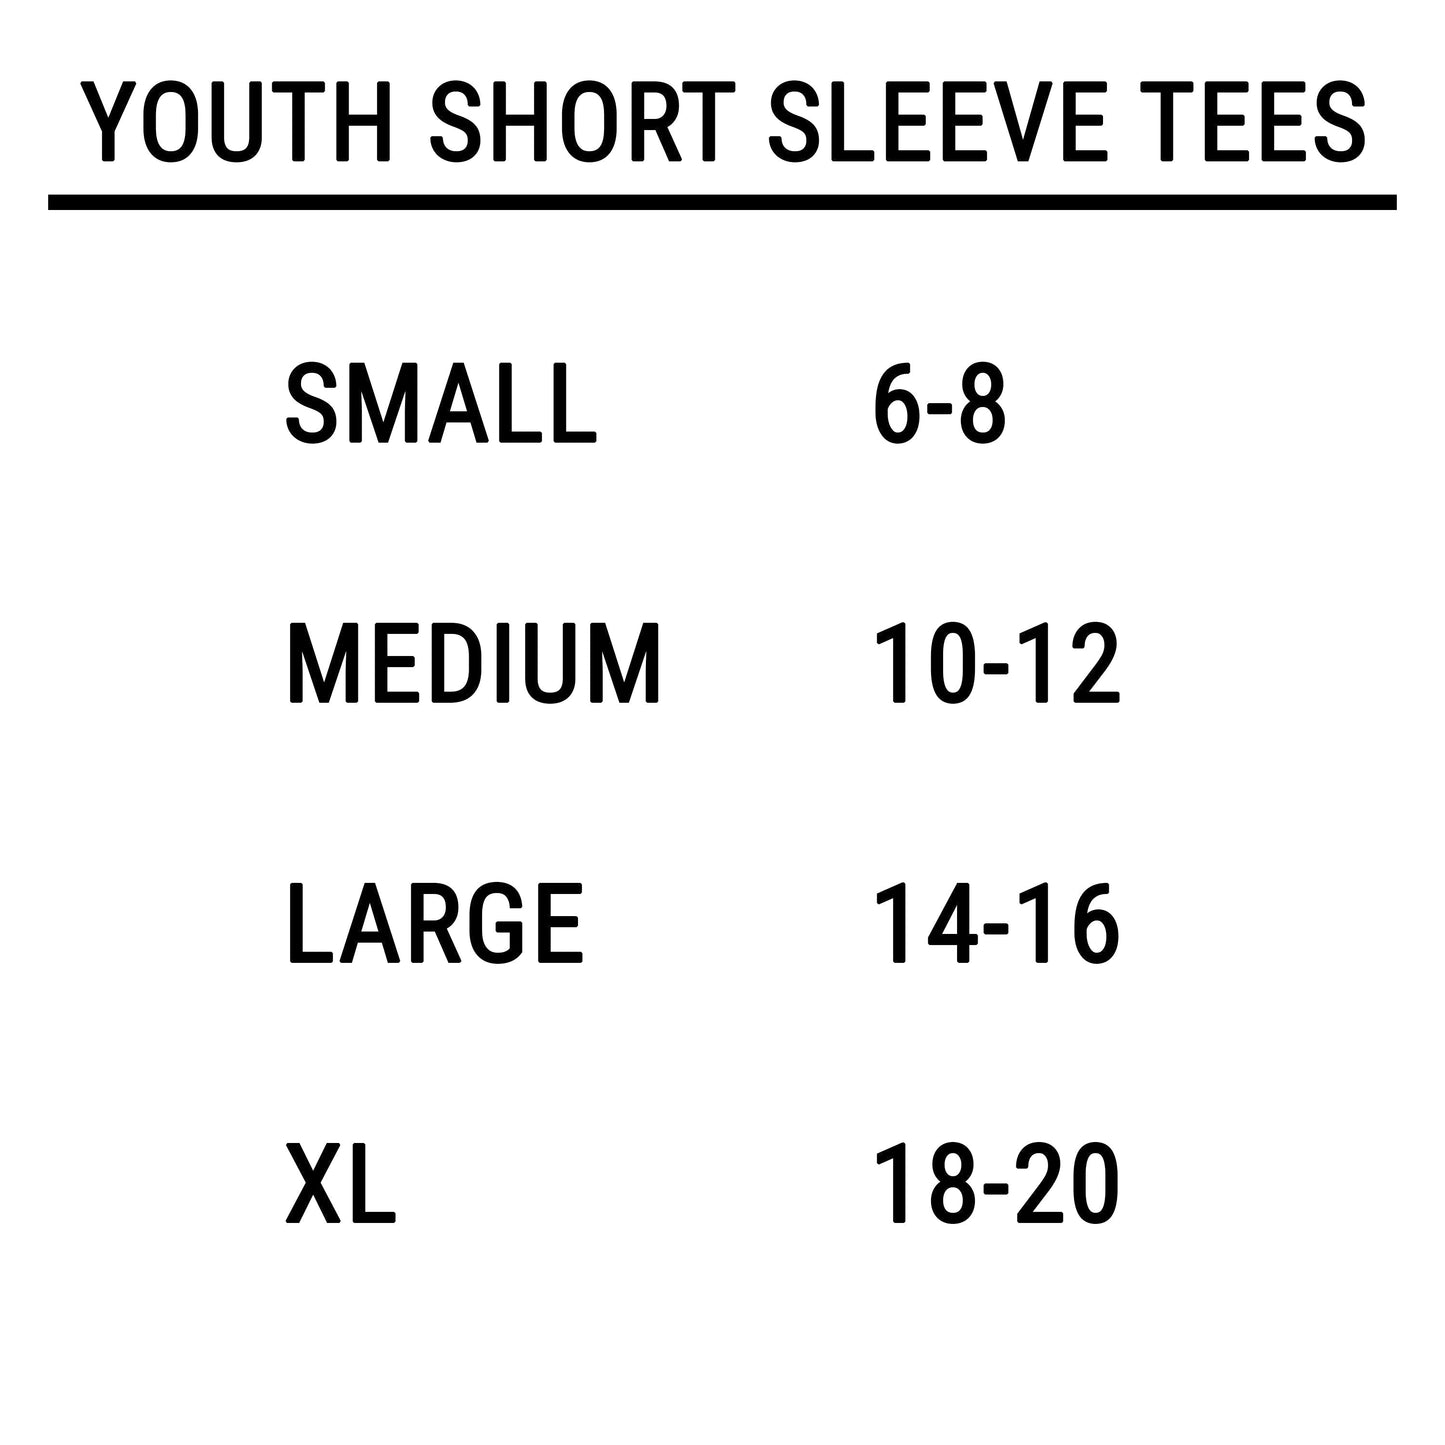 Little Brother Checkered | Youth Graphic Short Sleeve Tee